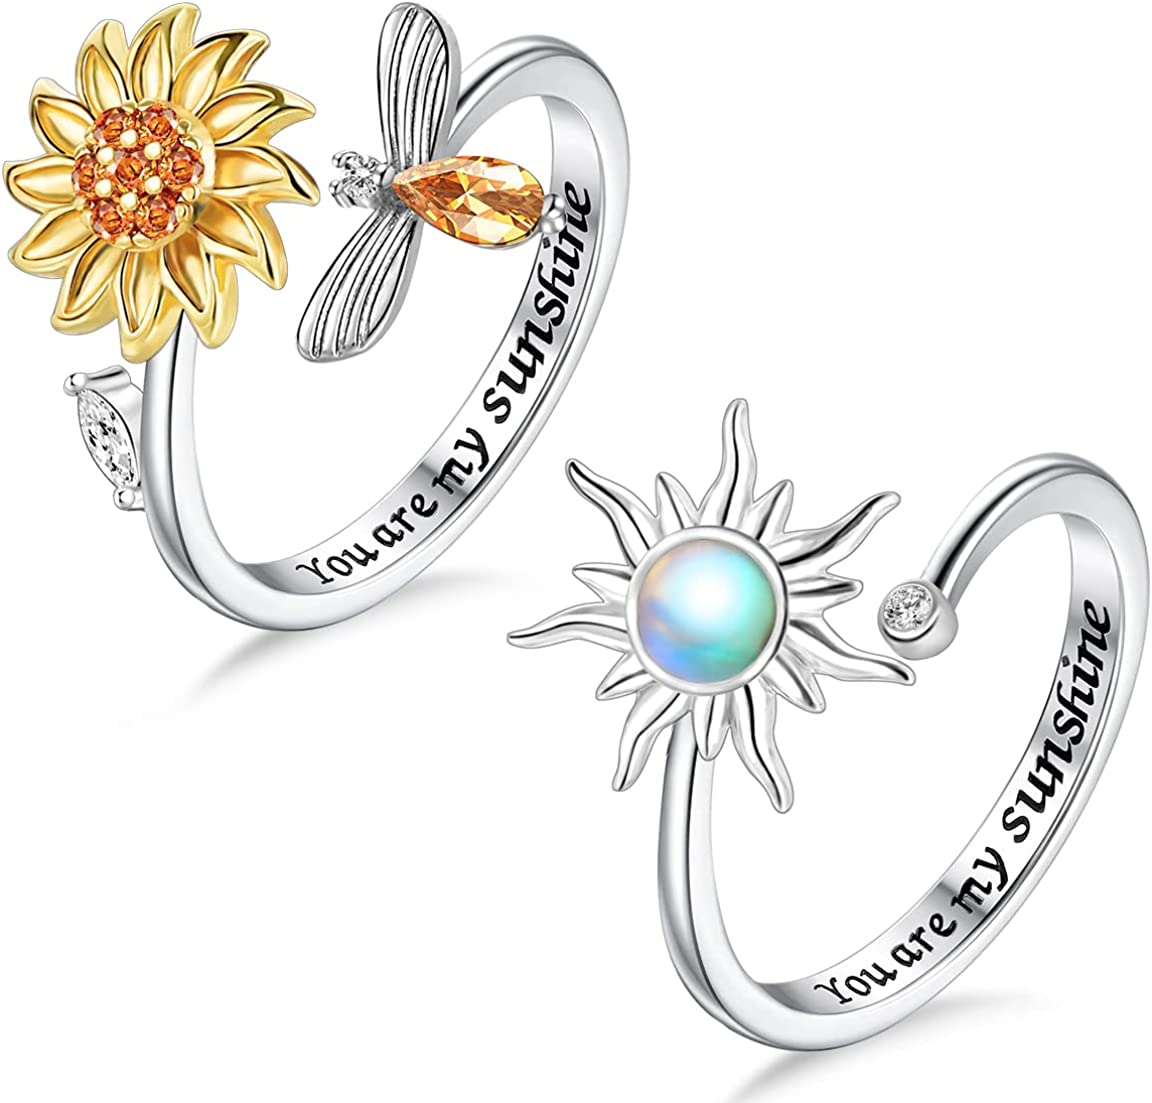 Adjustable Anxiety Ring for Women Fidget Rings for Anxiety Stress Relief for Teens with Cute Sunflower Bee Bead